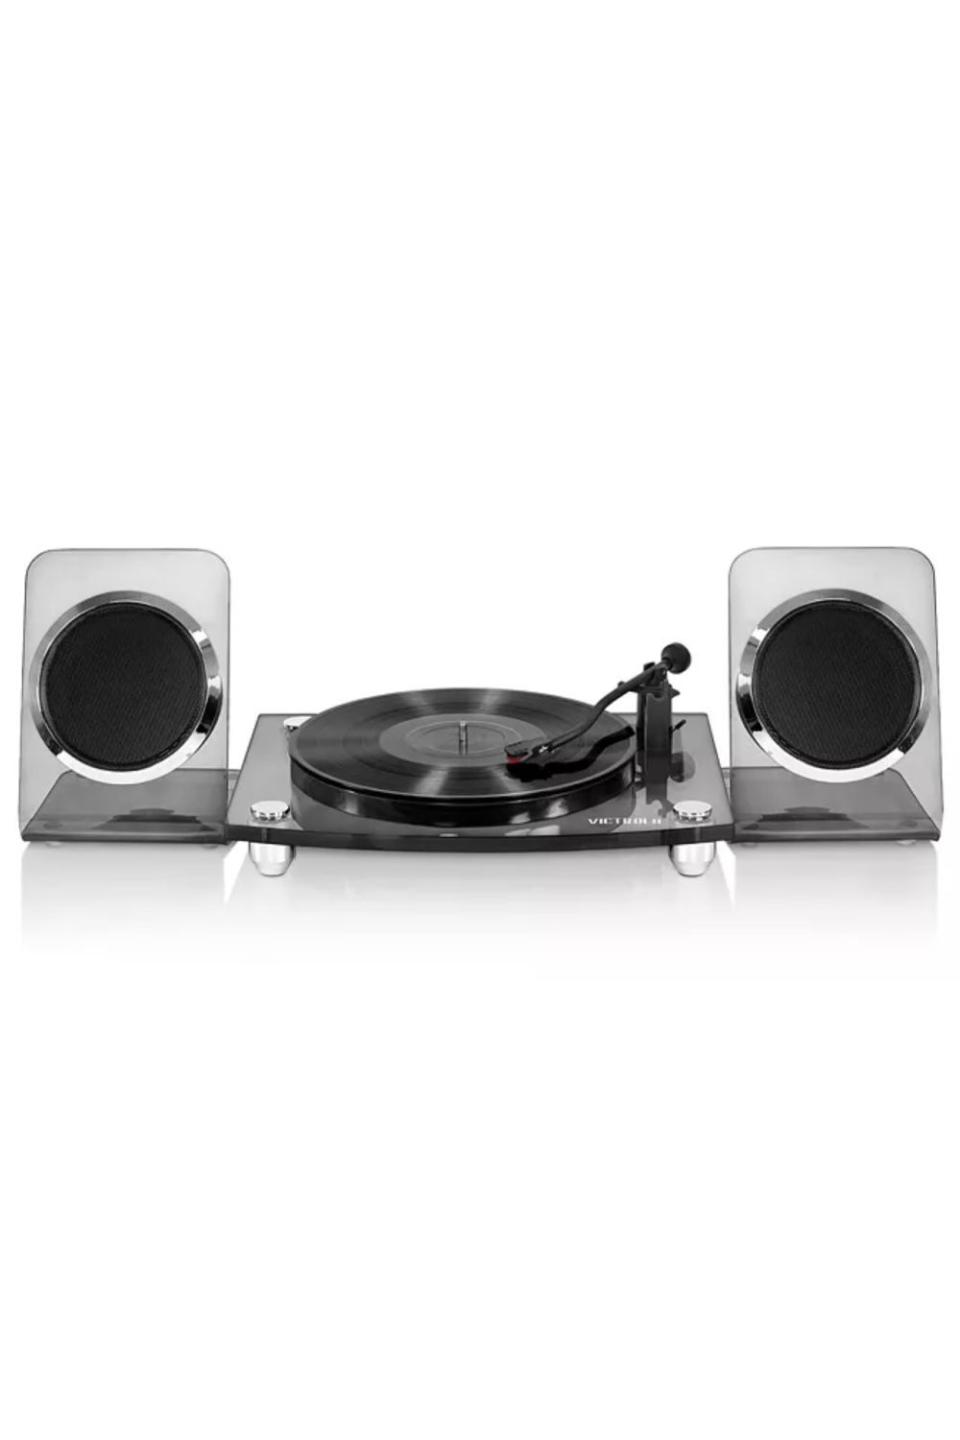 23) Victrola Acrylic Bluetooth 40-Watt Record Player w/ 2-Speed Turntable & Rechargeable Speakers